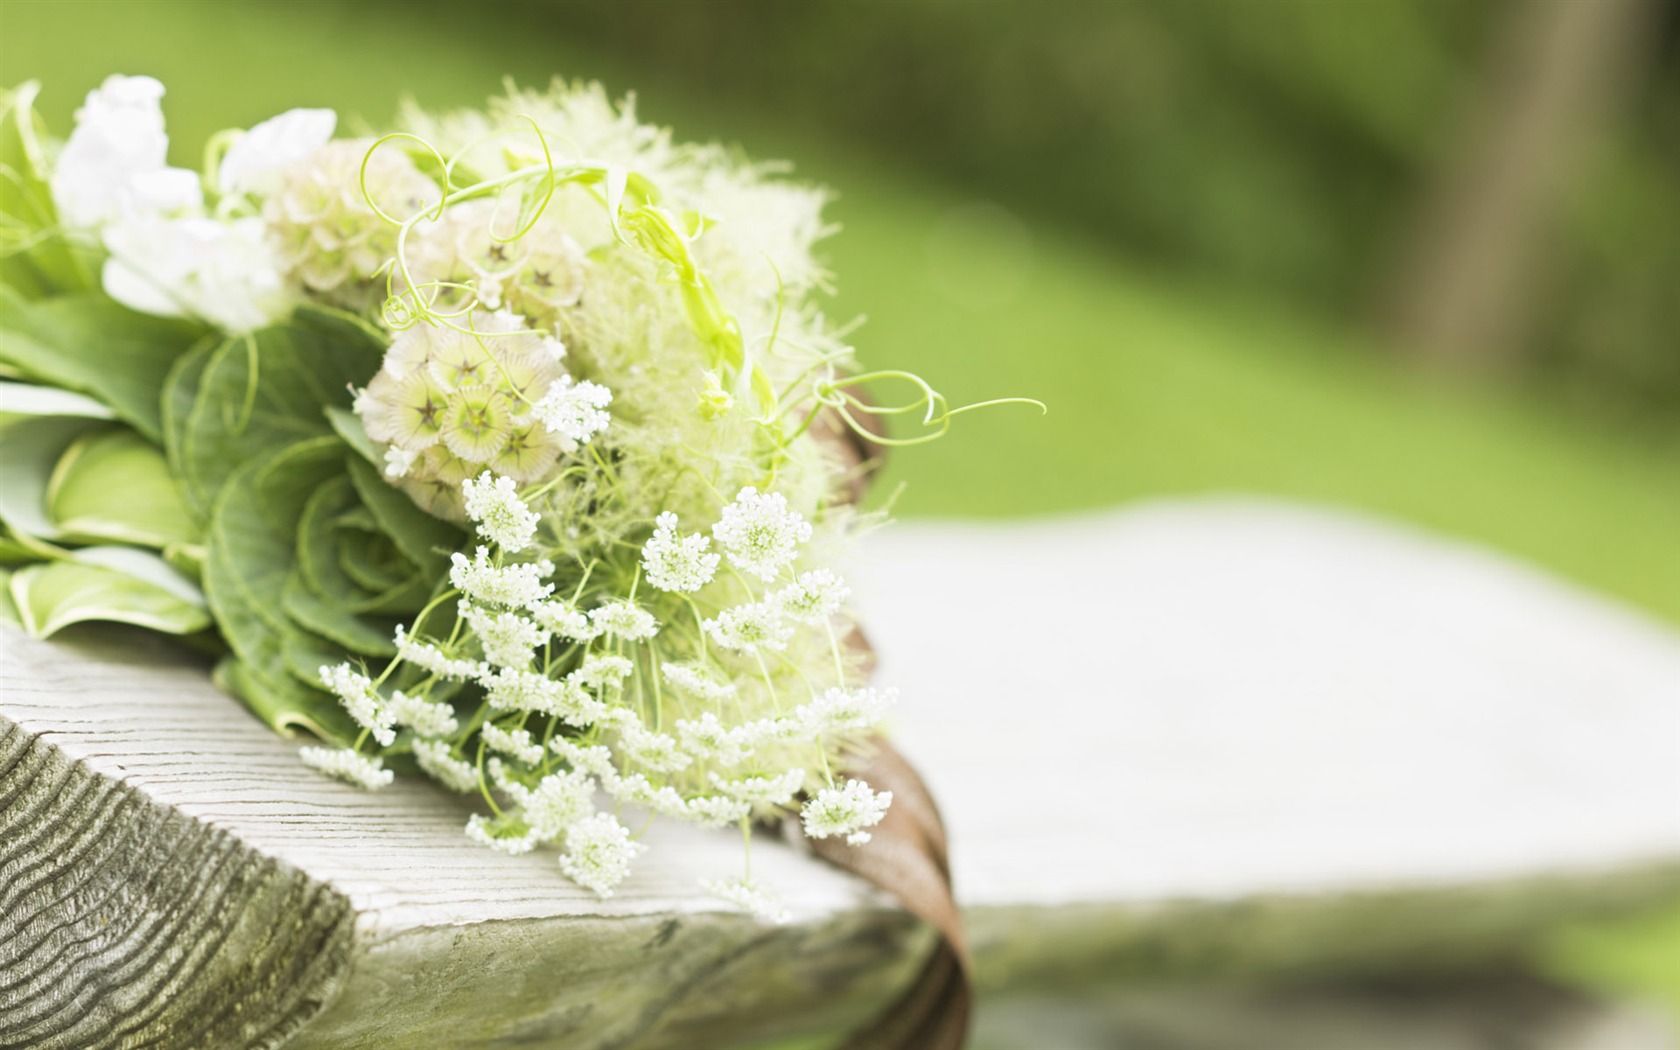 Weddings and Flowers wallpaper (2) #19 - 1680x1050